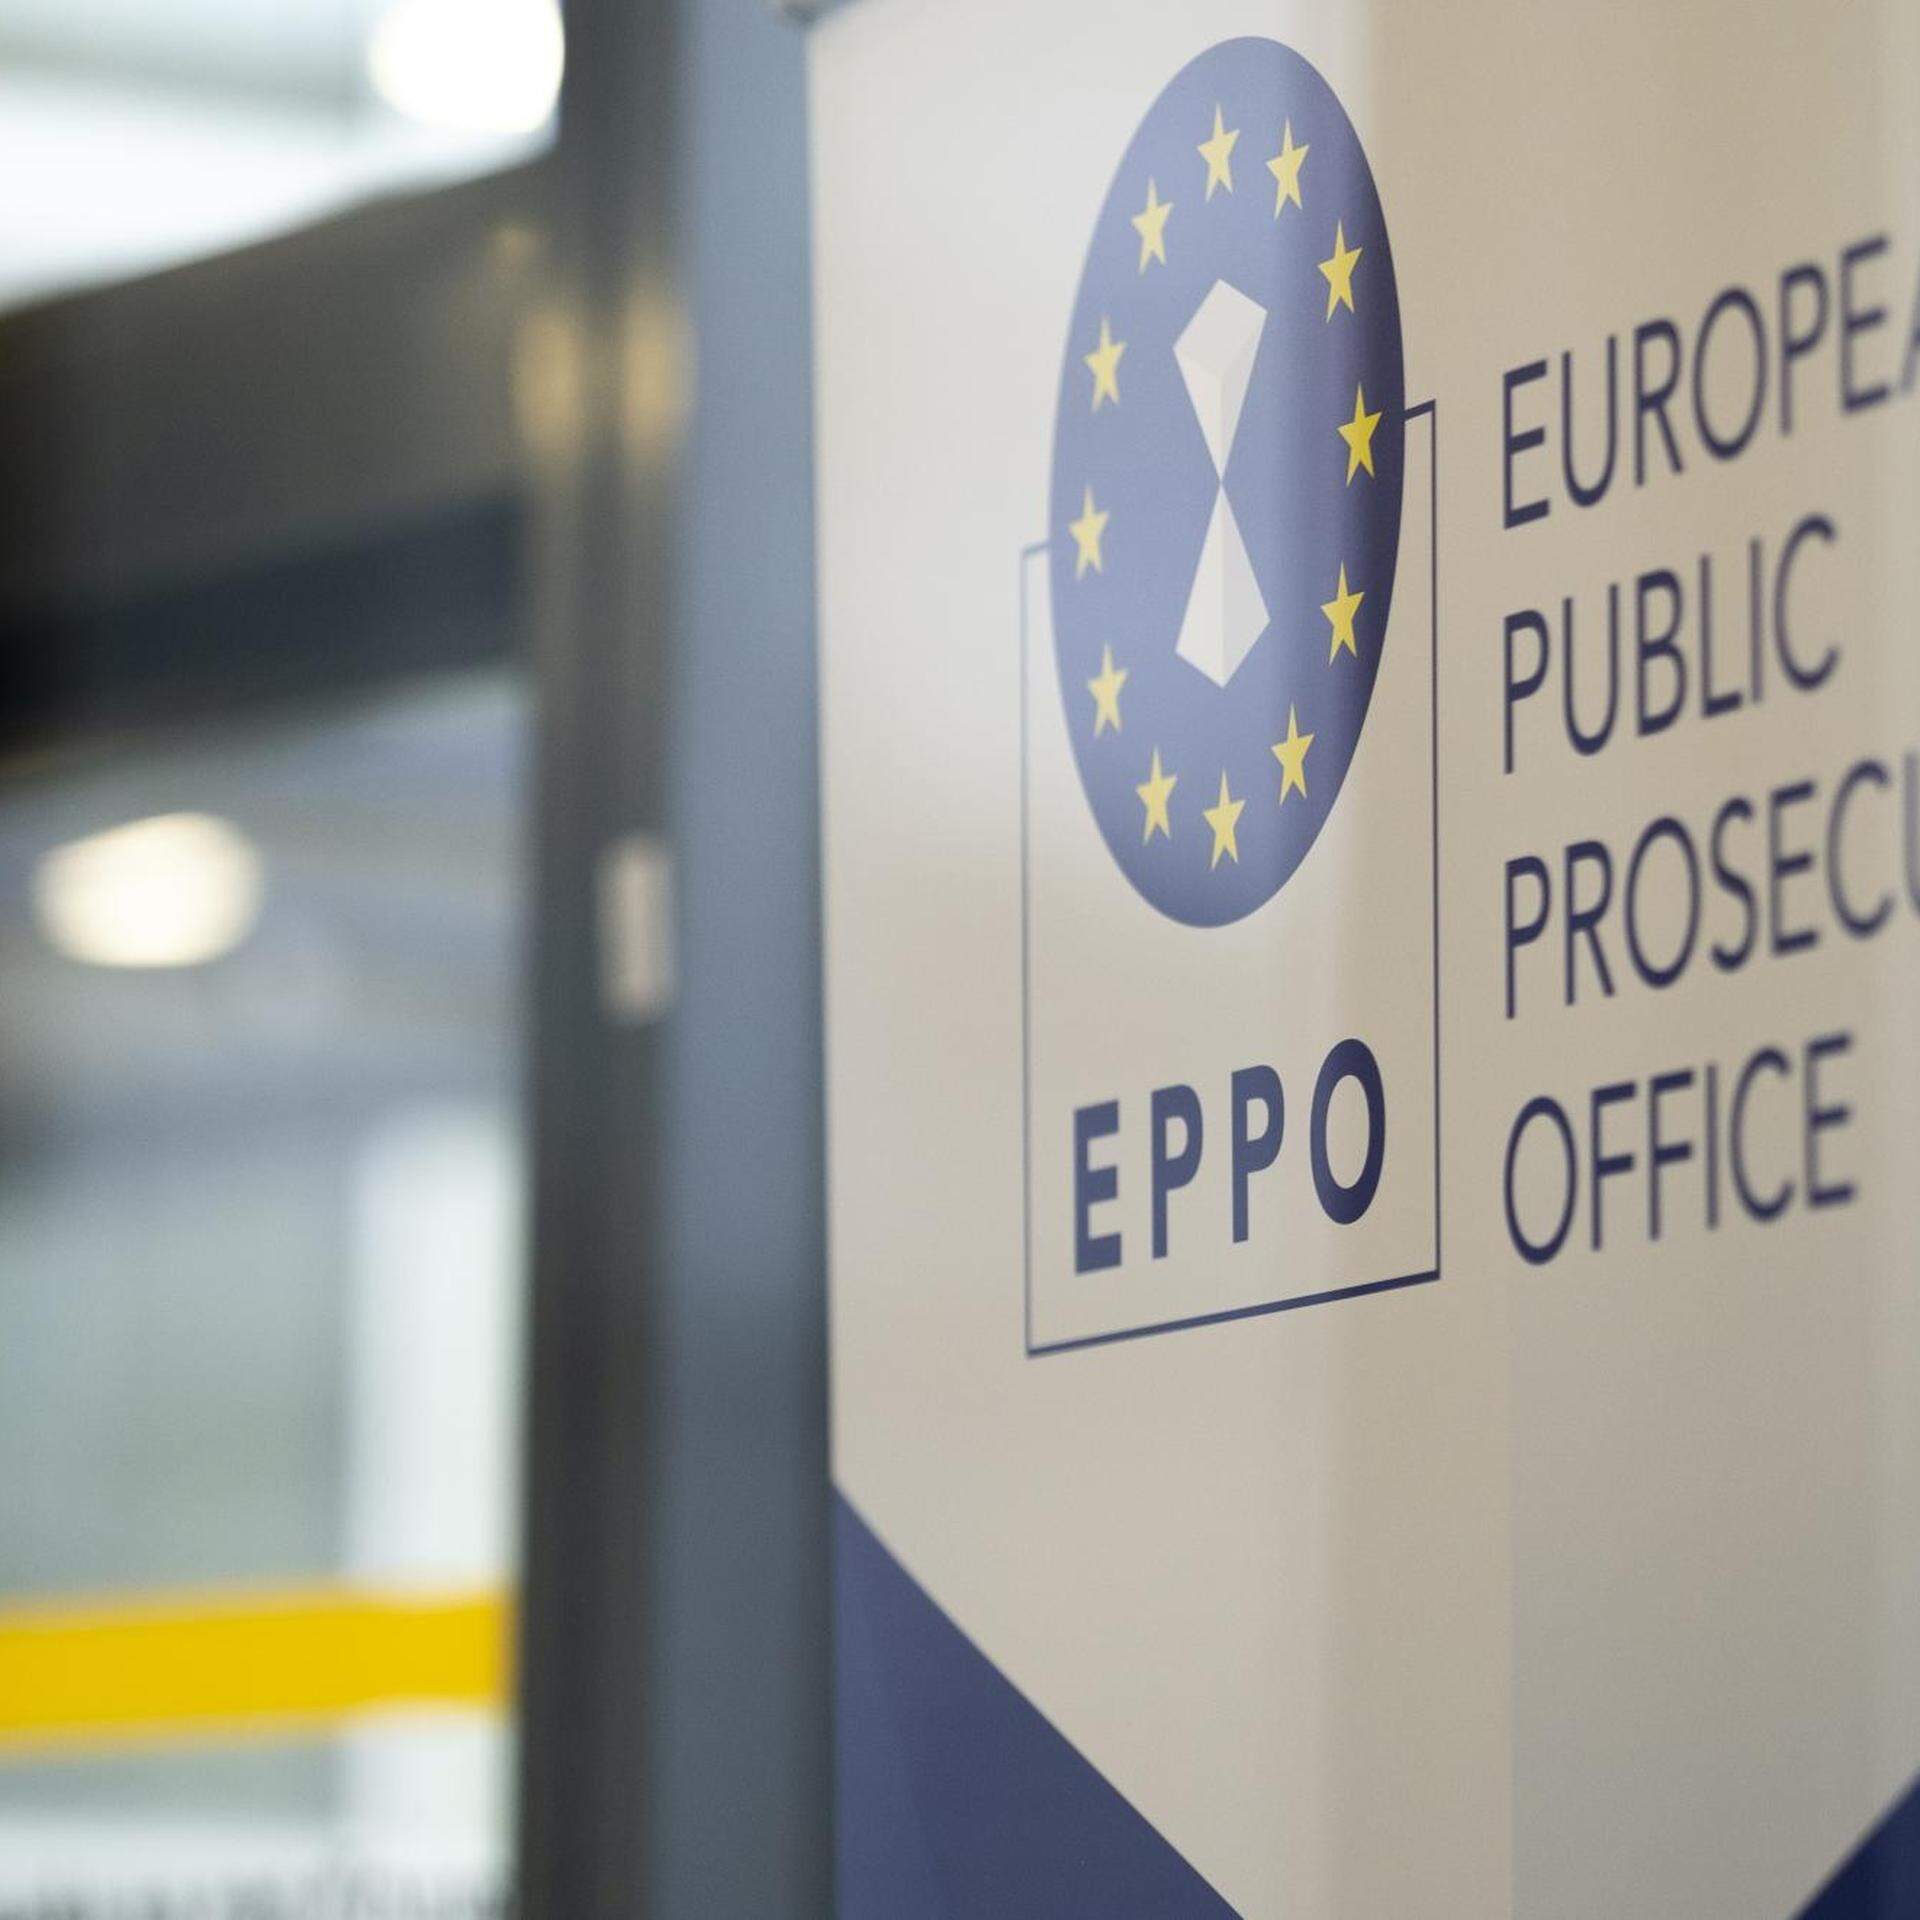 The EPPO also insists that it must move towards autonomy from the European Commission, including on its IT needs